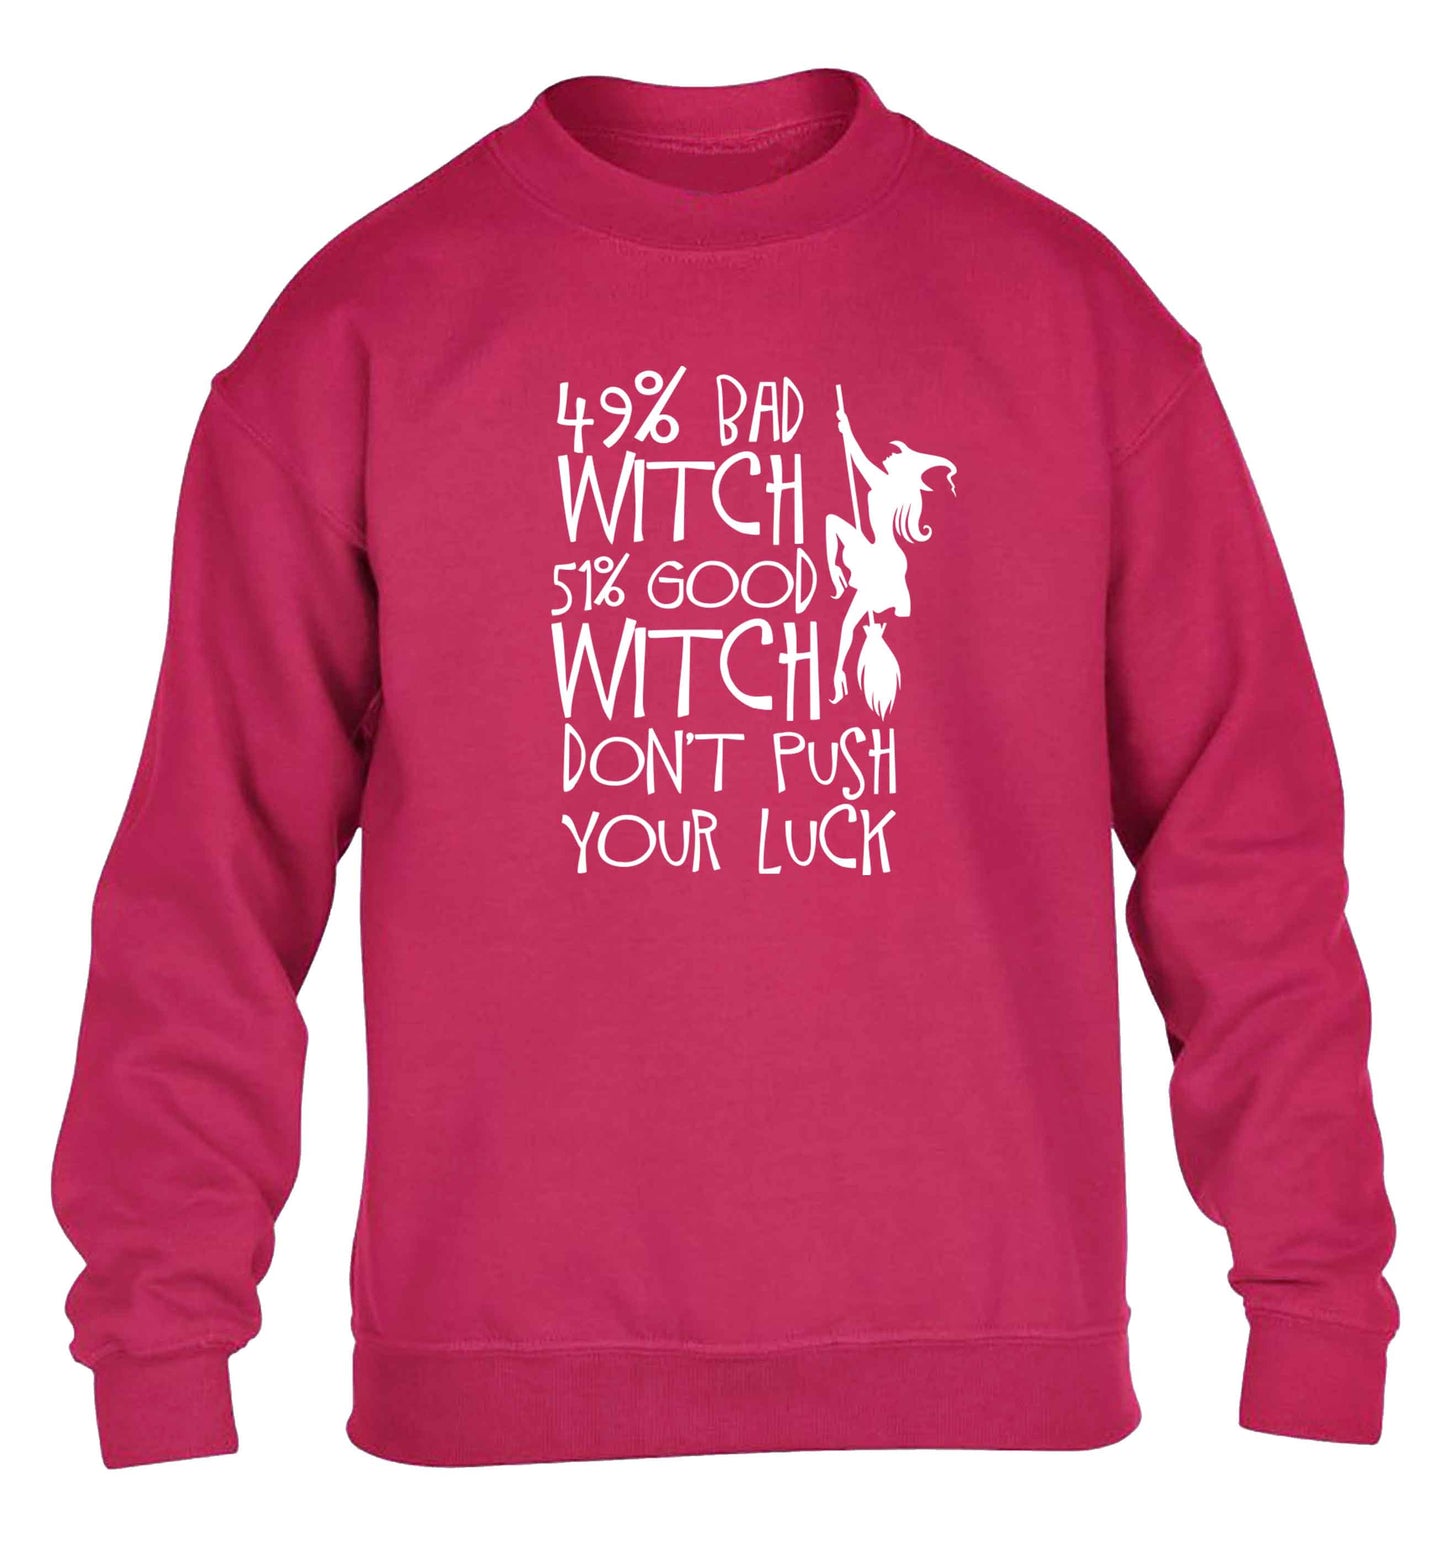 49% bad witch 51% good witch don't push your luck children's pink sweater 12-13 Years